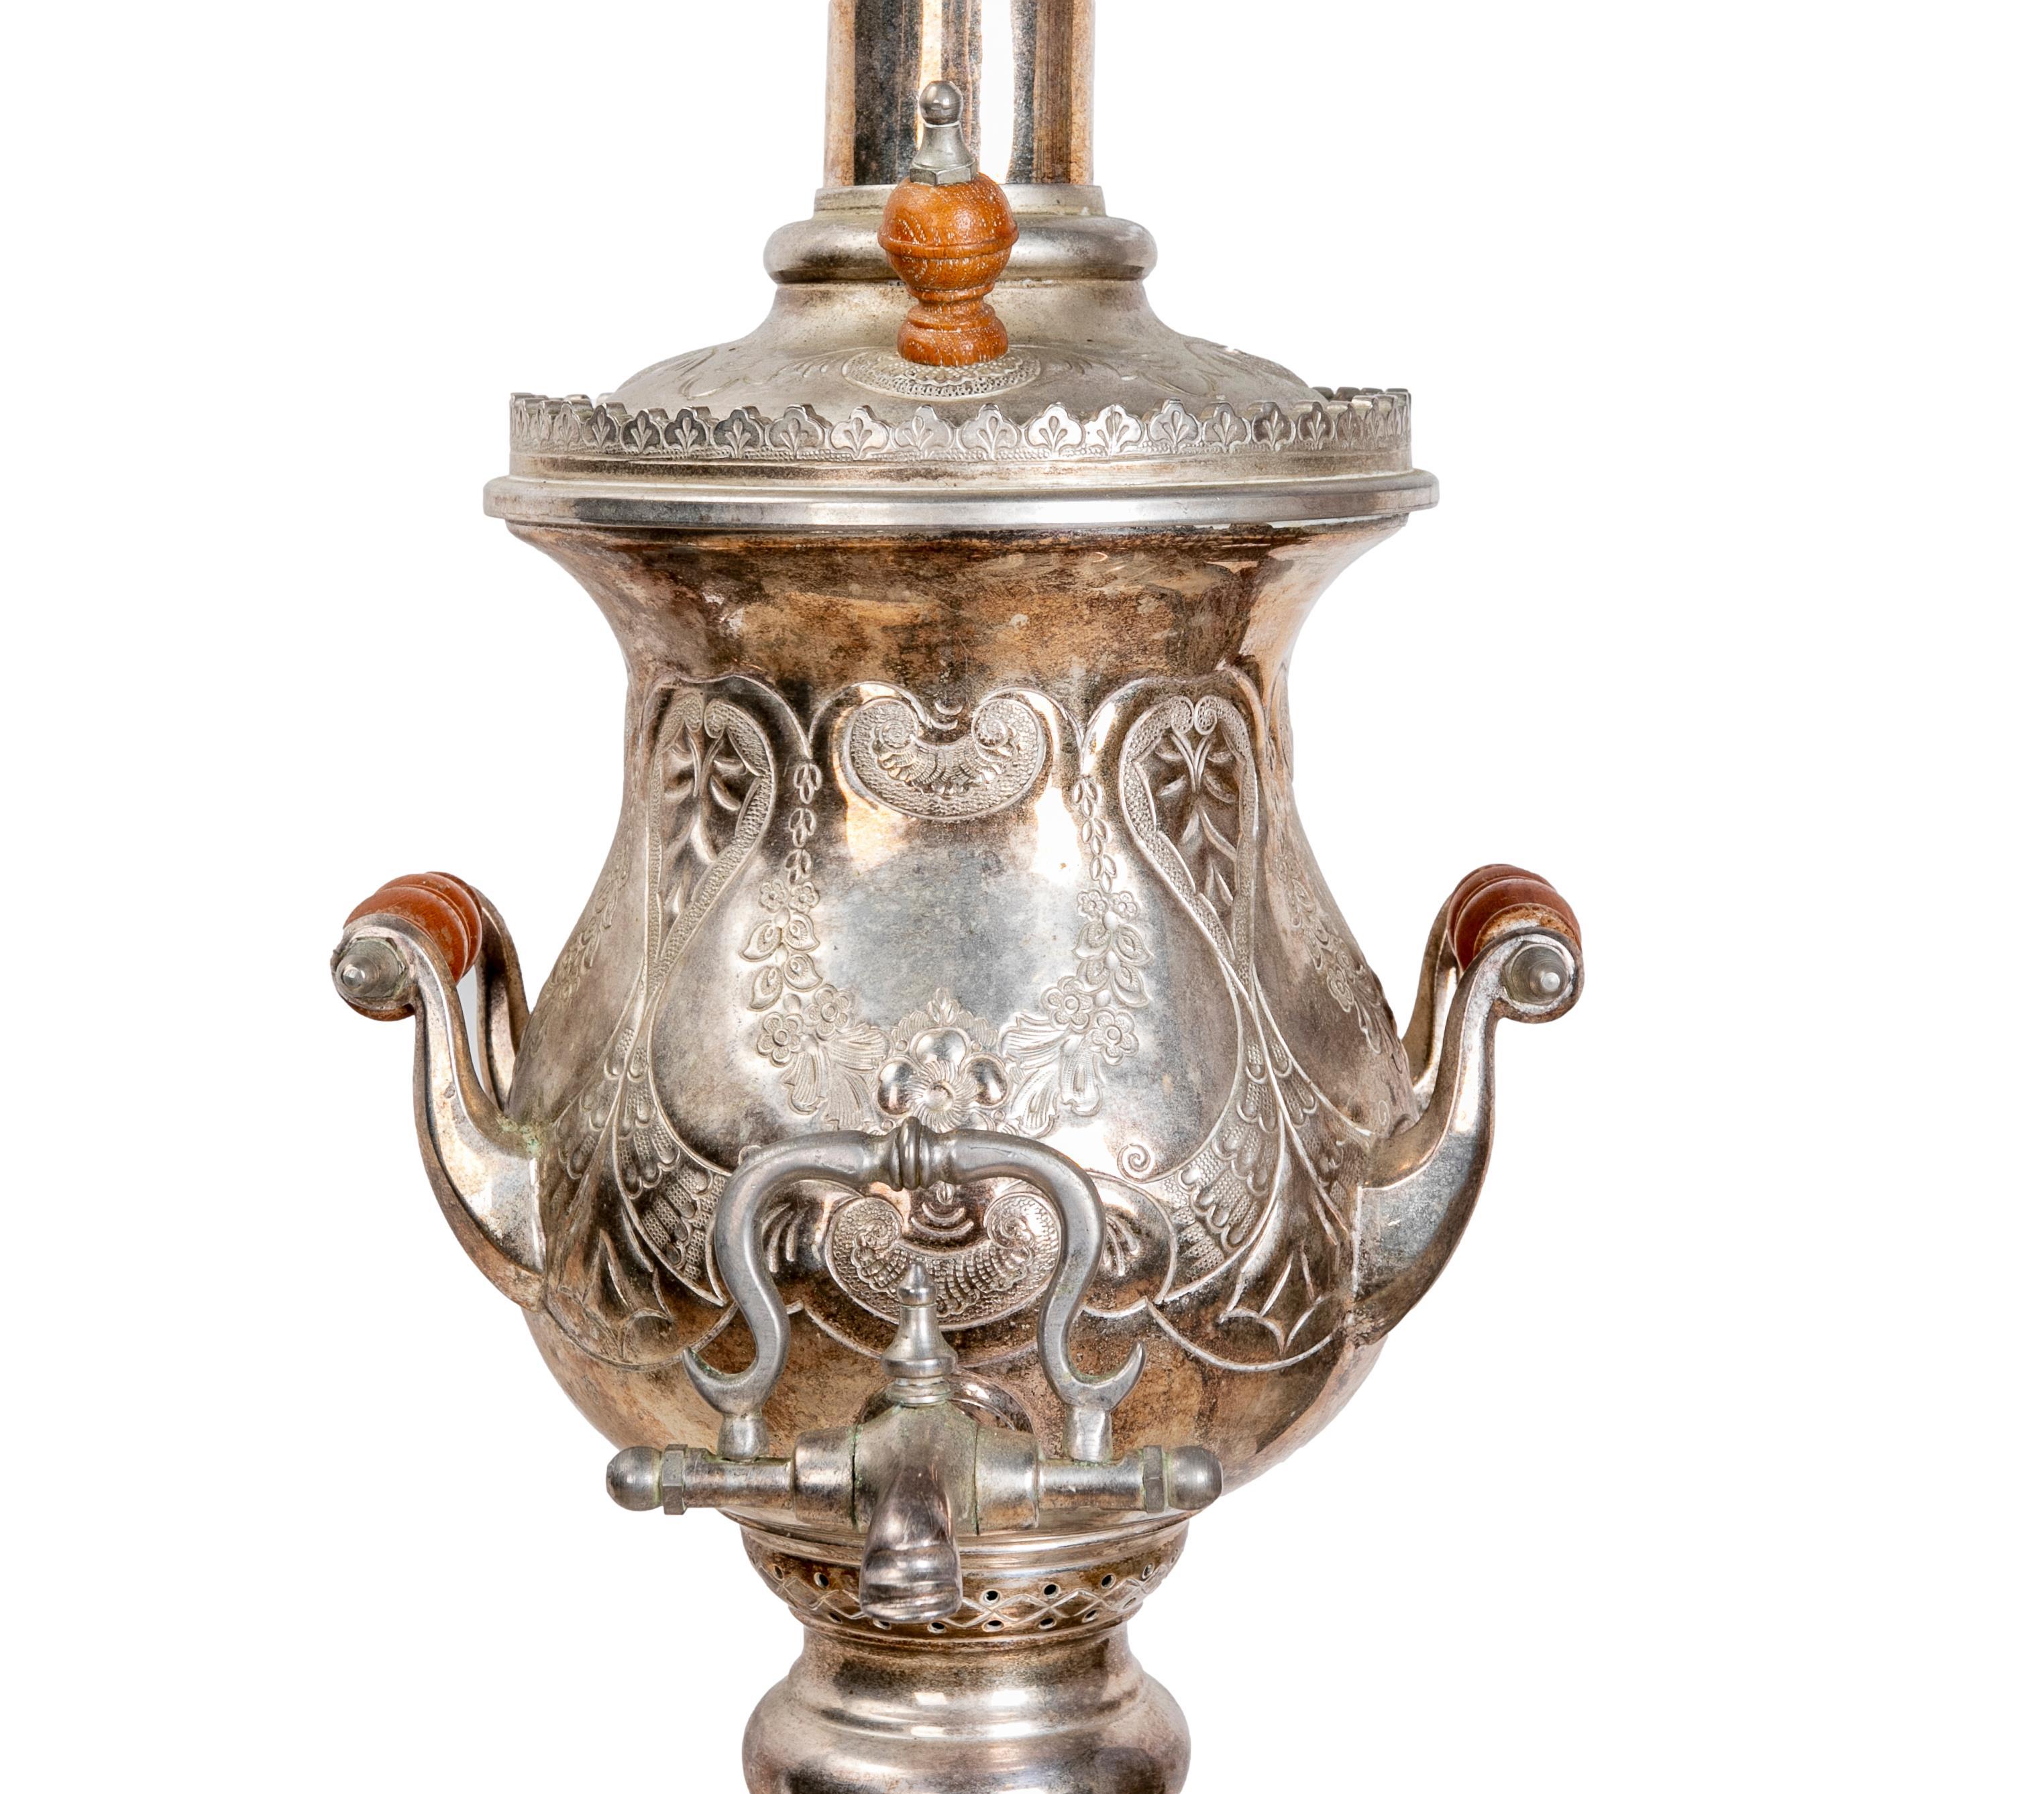 1980s Moroccan Silver-Plated Metal Samovar with Wooden Handles 1